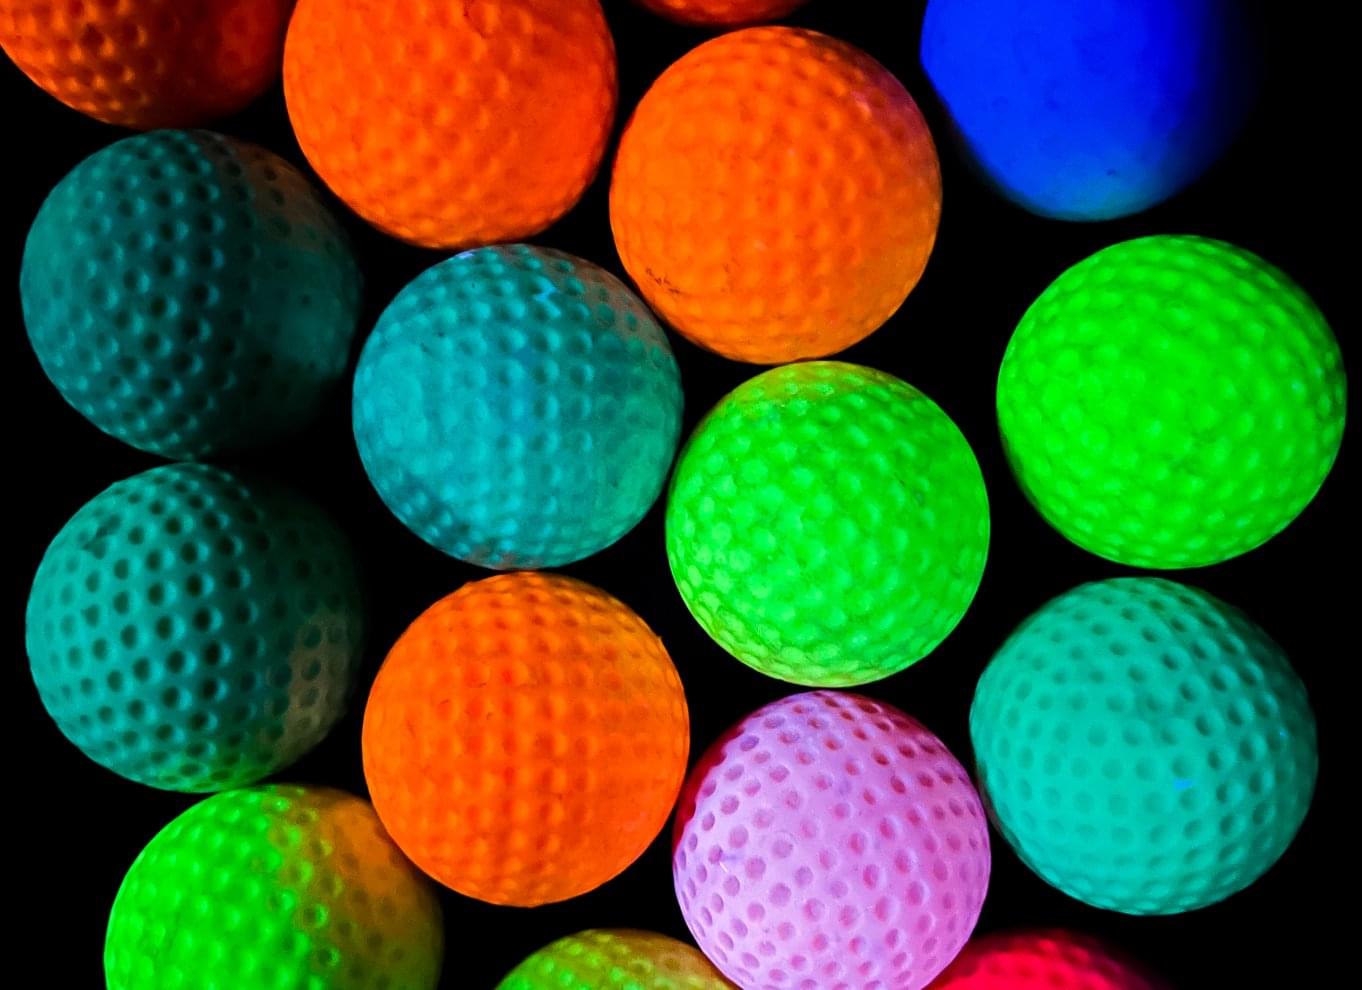 See the vibrant colors of the balls